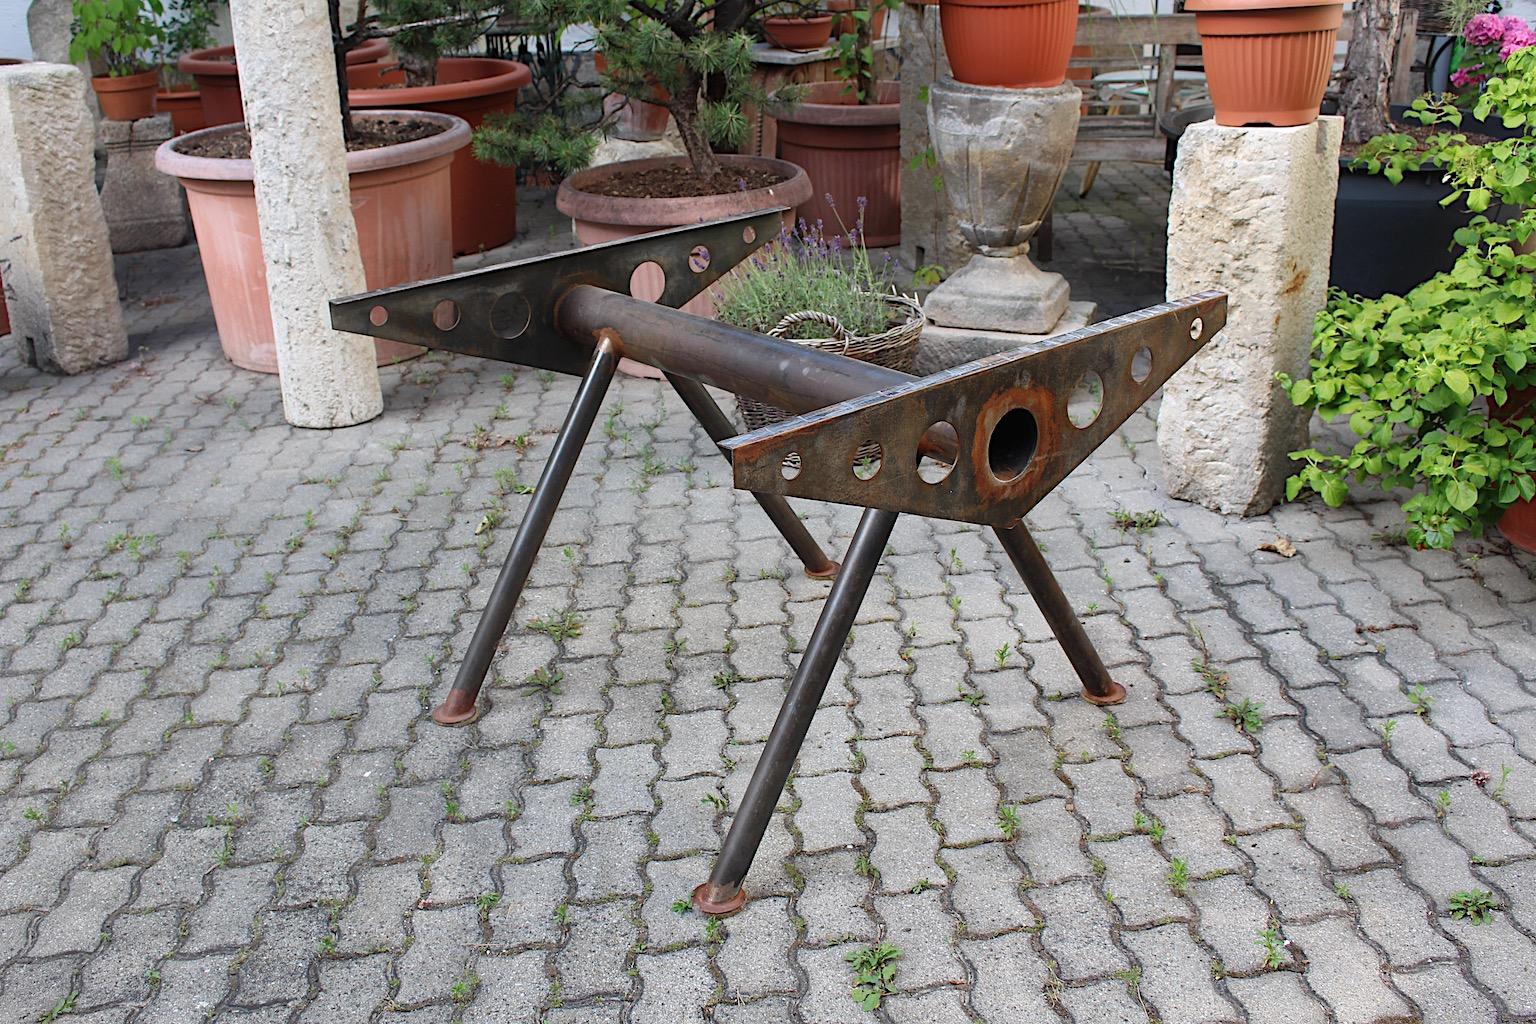 Industrial style vintage metal center table base or table Style Jean Prouve 1980s.
A high quality industrial style table base or table from metal style Jean Prouve from the 1980s.
This extraordinary and gorgeous raw metal table base from steel